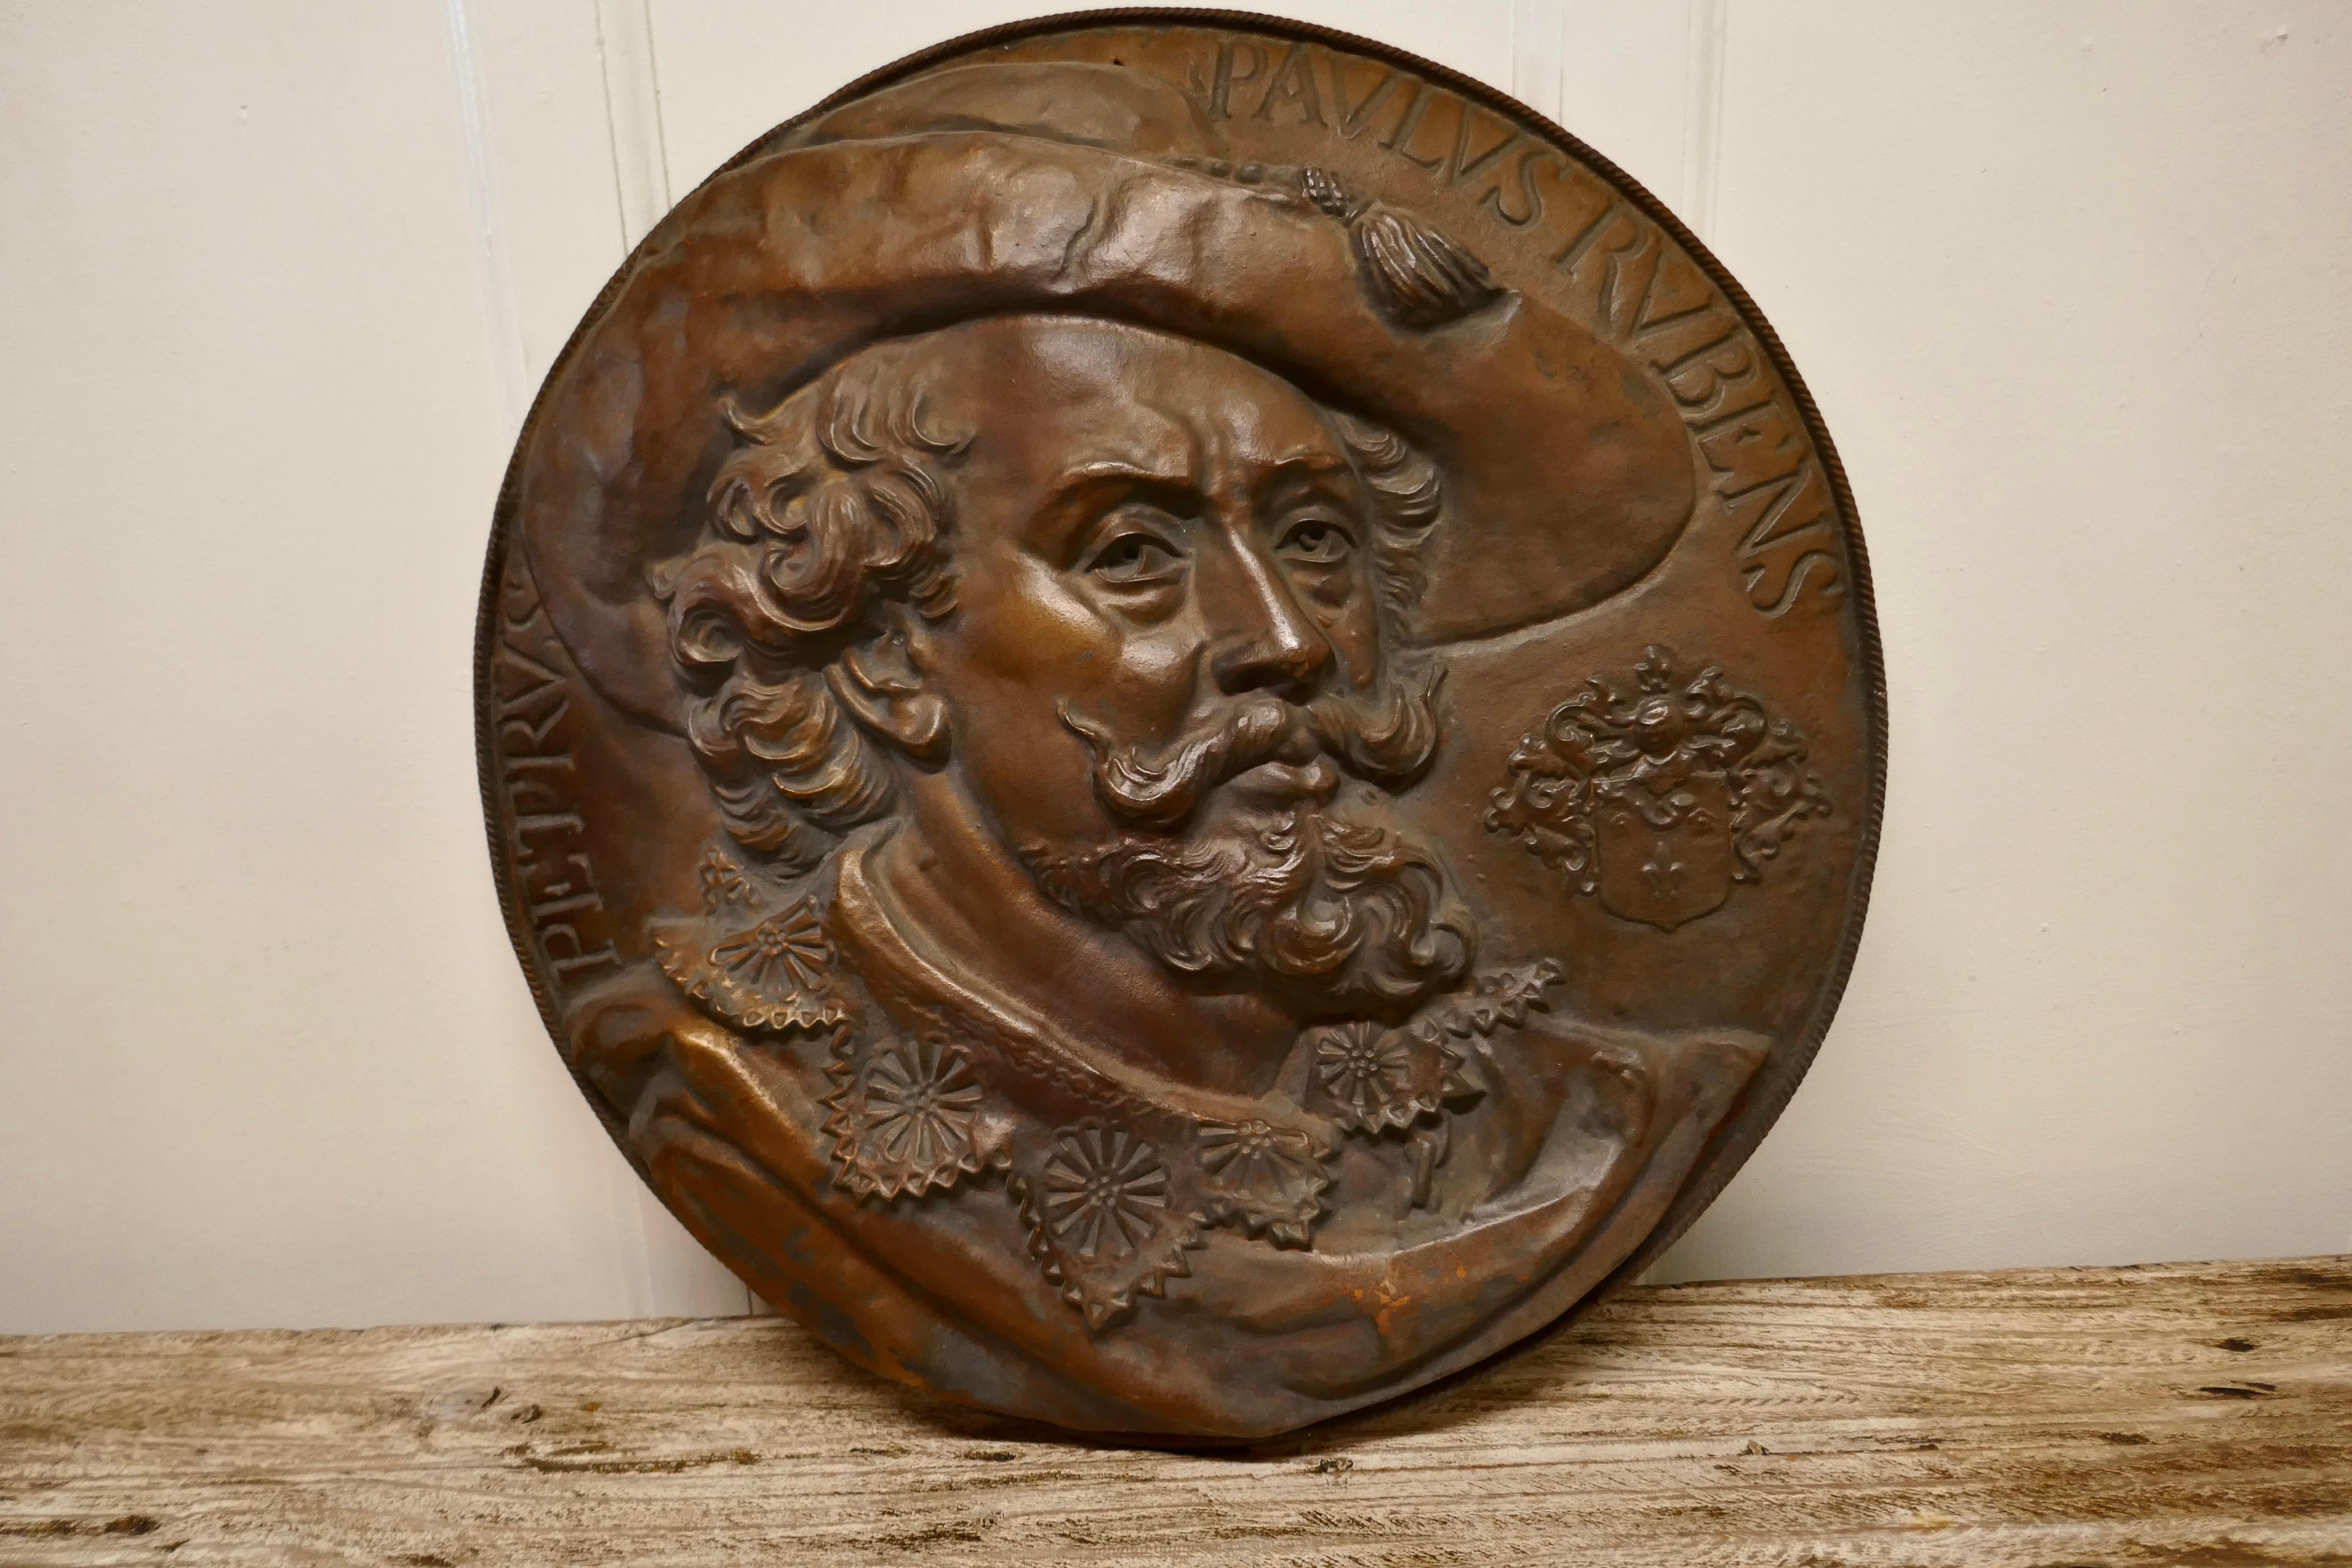 Cast roundel portrait plaque of Peter Paul Rubens 1577-1640

Portrait plaque of the Flemish Painter and Diplomat best known for his Baroque religious and mythological paintings
A superb and unusual piece the plaque is not heavy, it is in good